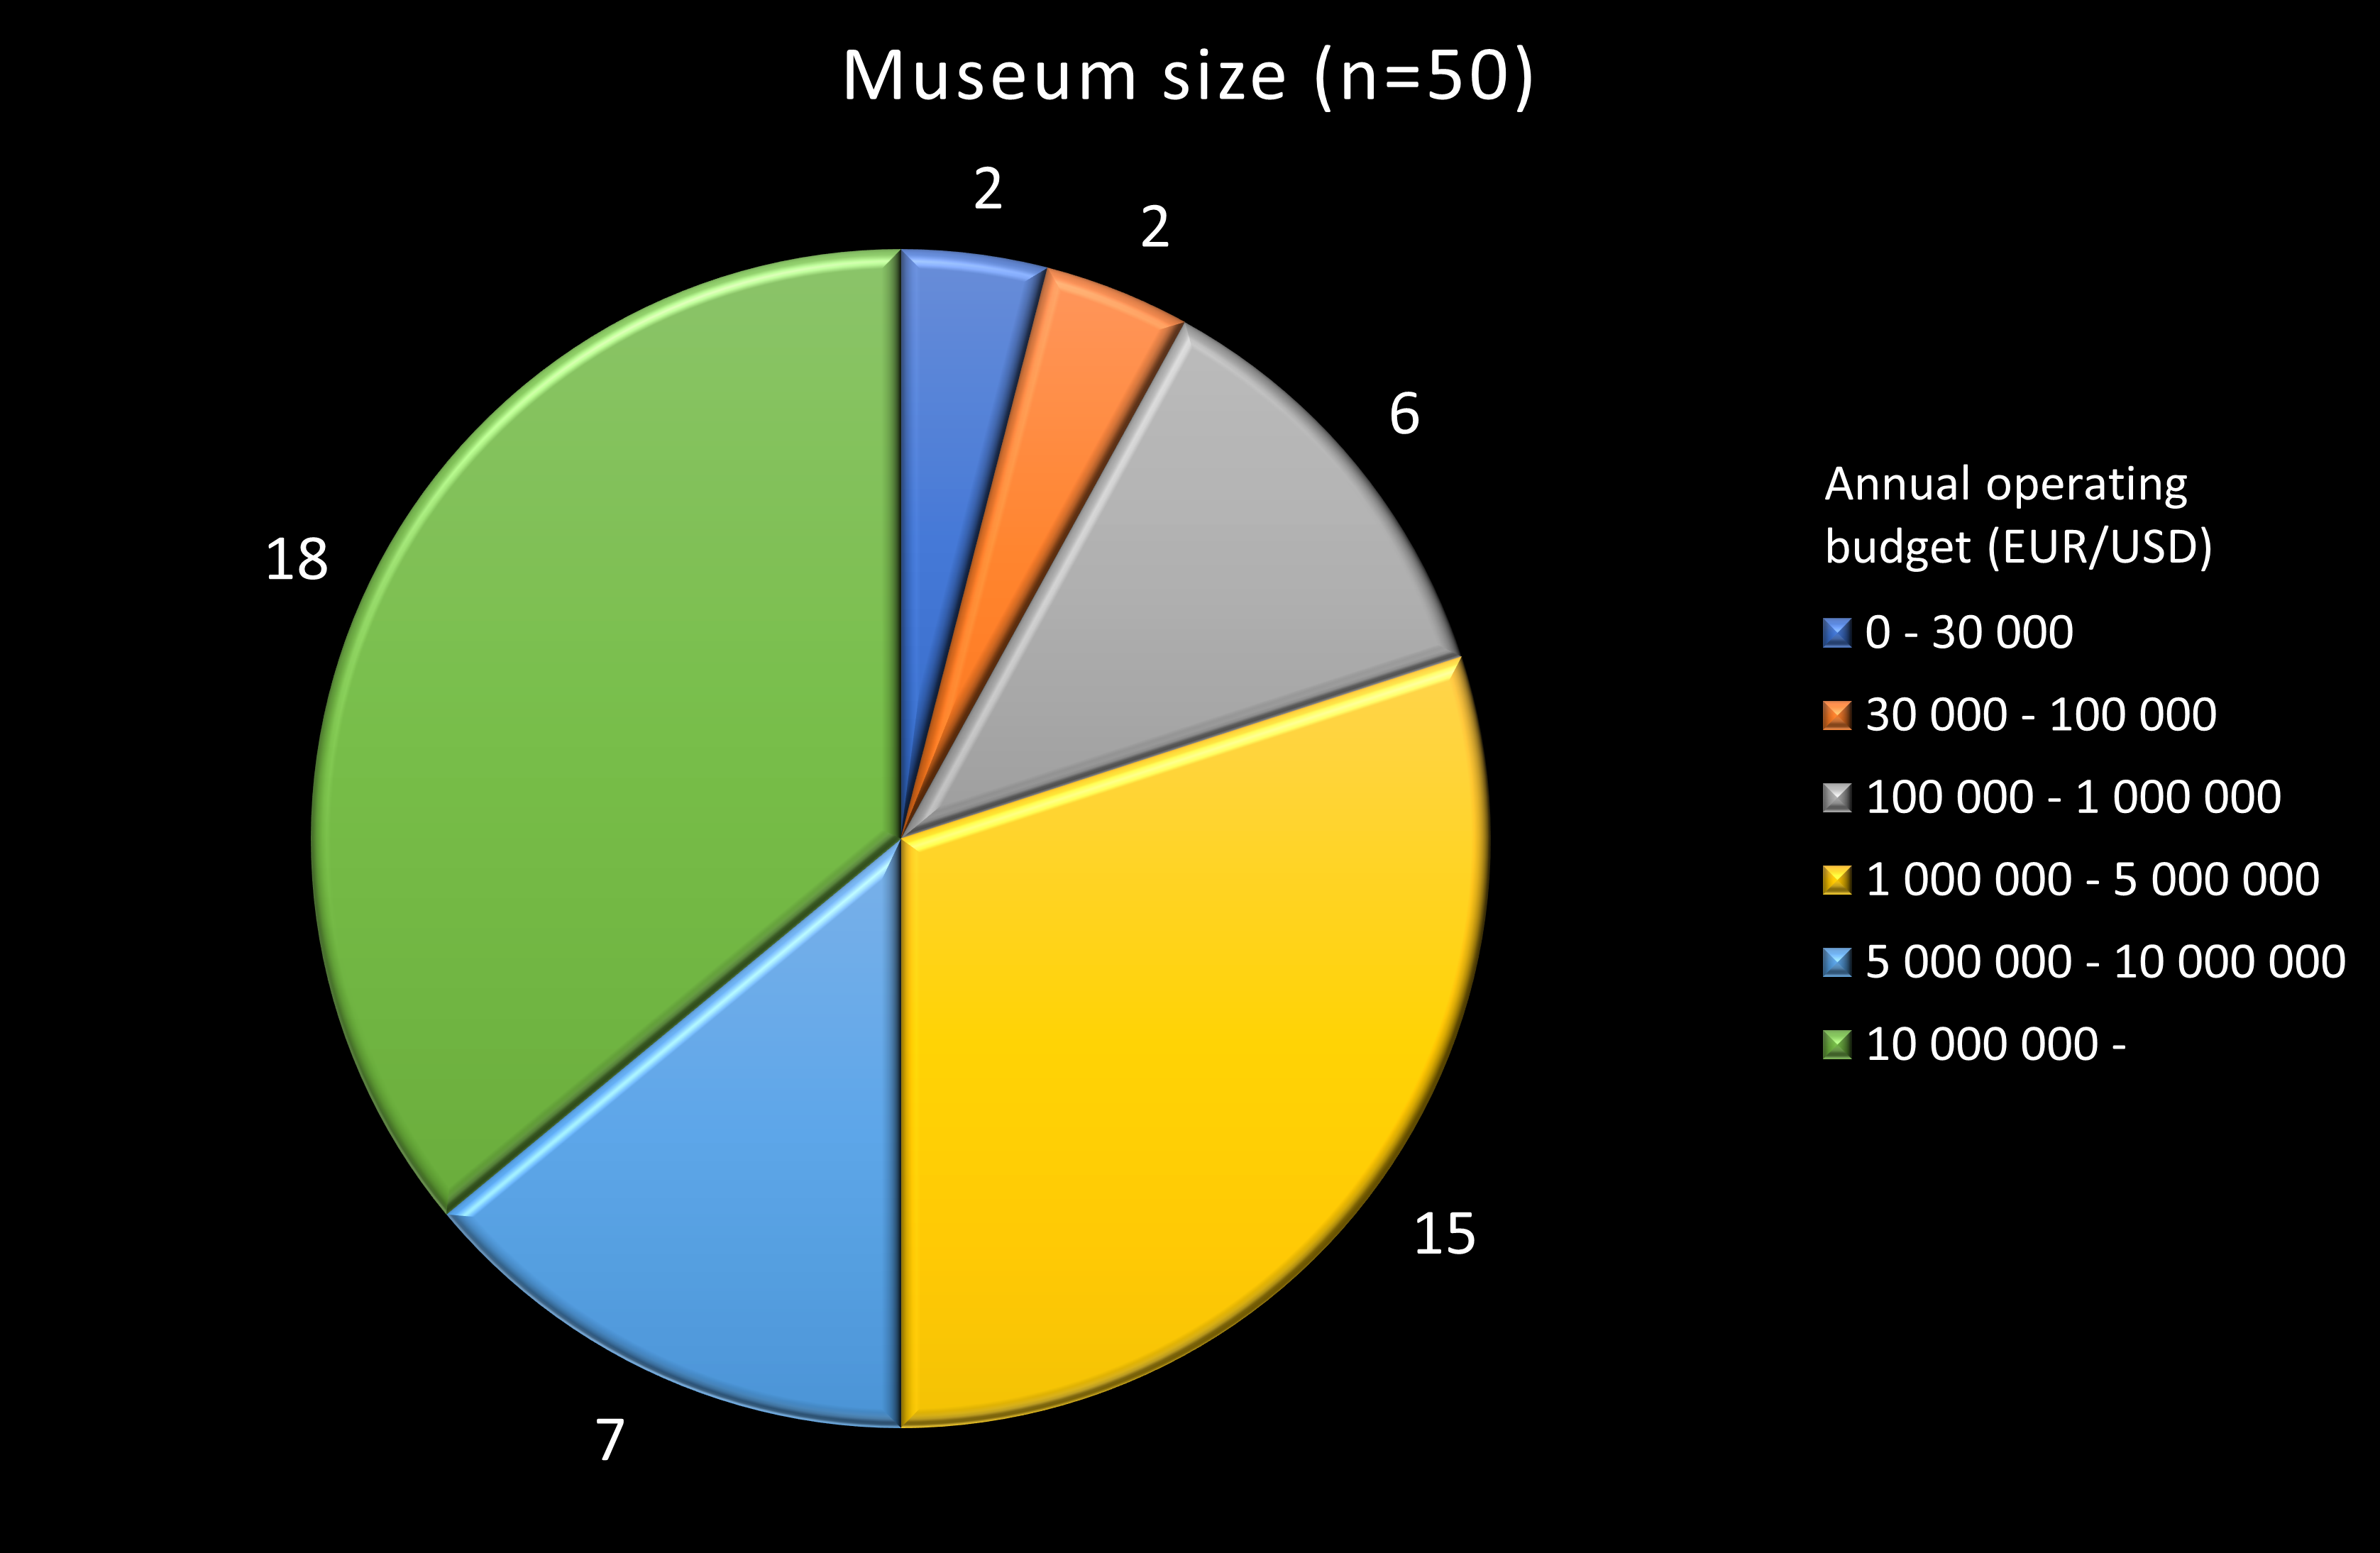 Chart showing the relative numbers of museums of different sizes which have responded to the survey